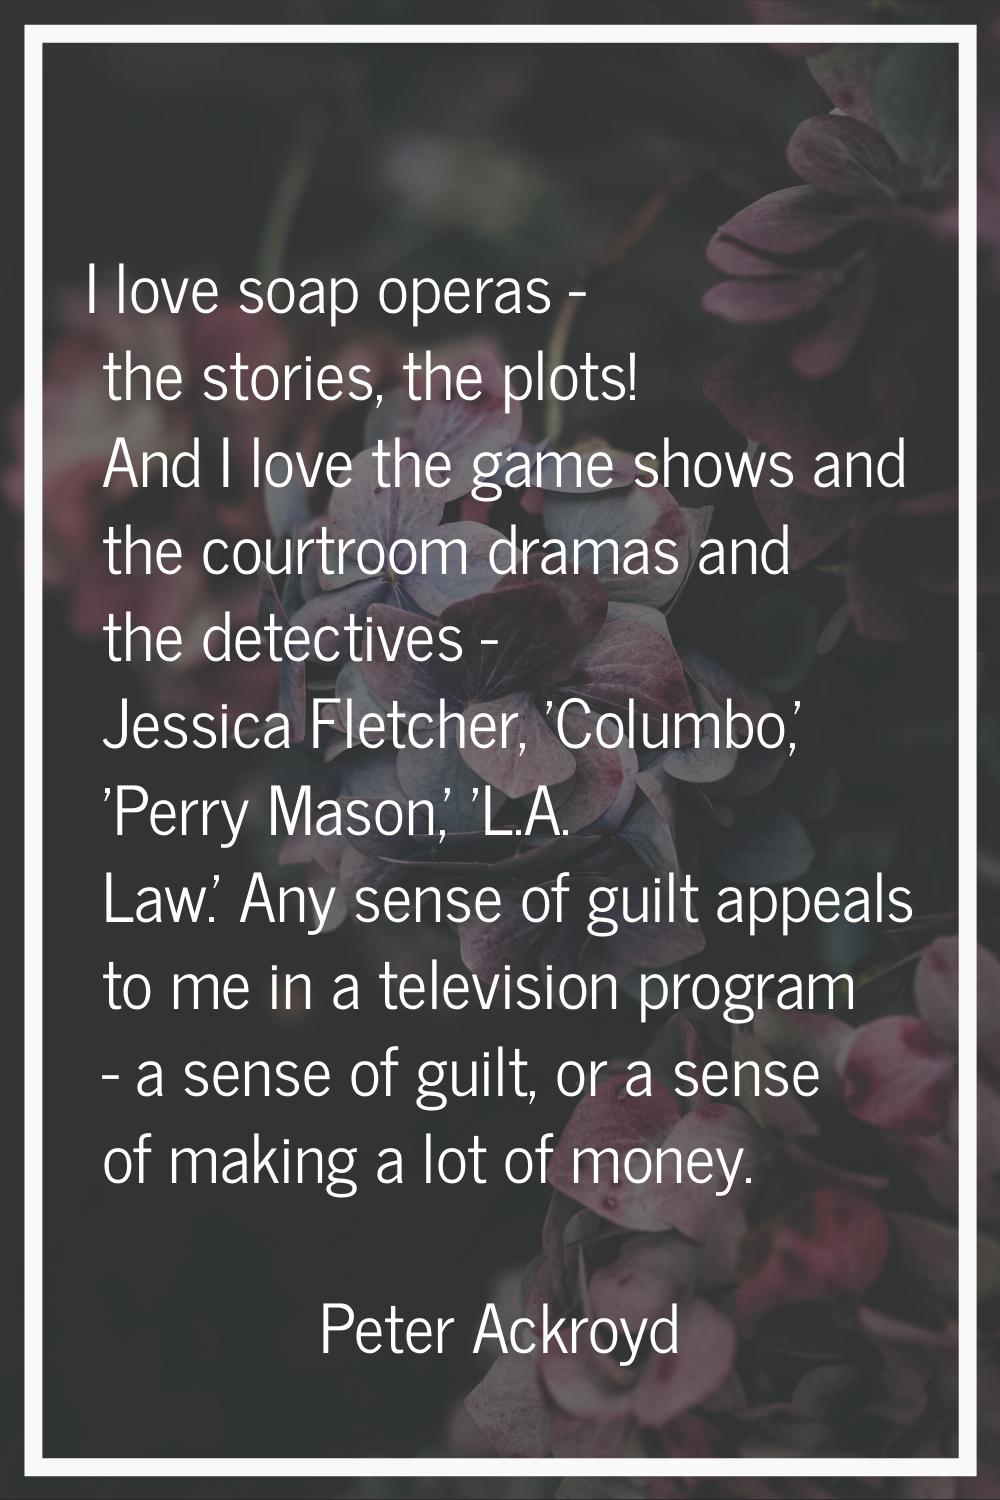 I love soap operas - the stories, the plots! And I love the game shows and the courtroom dramas and